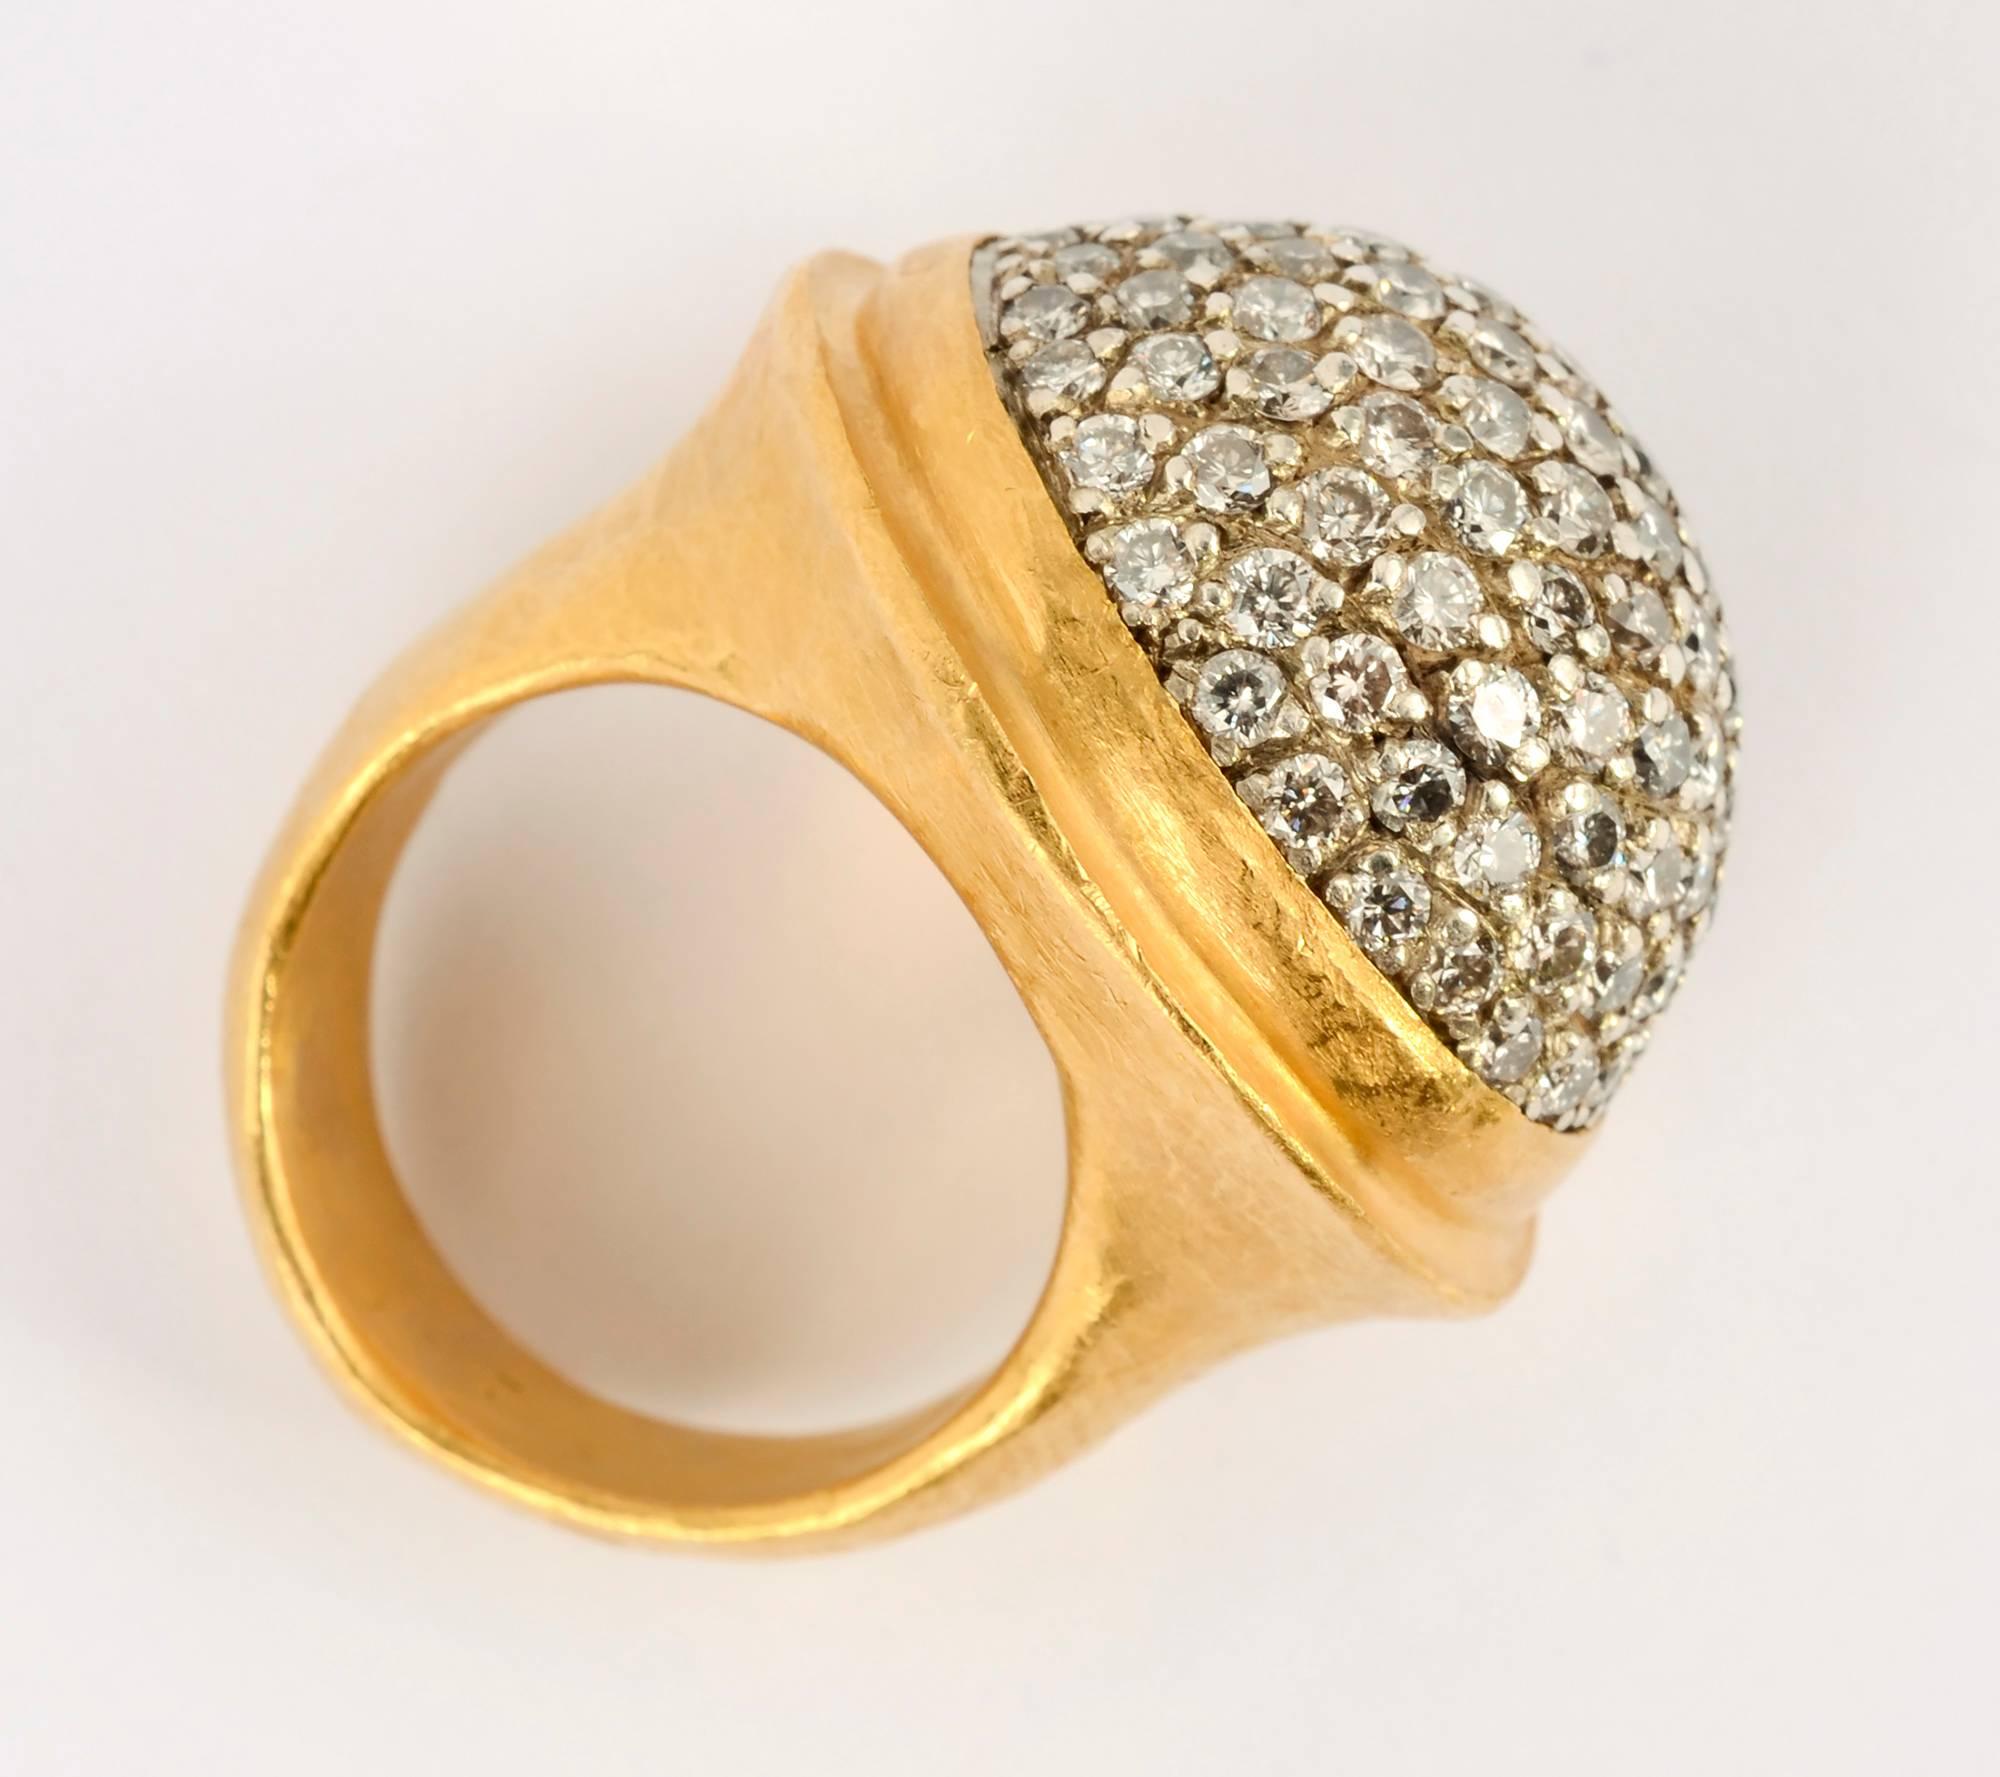 Stunning oval dome ring by Yossi Harari. It is set with pave diamonds. The ring is 24 karat hammered gold. It is size 6.